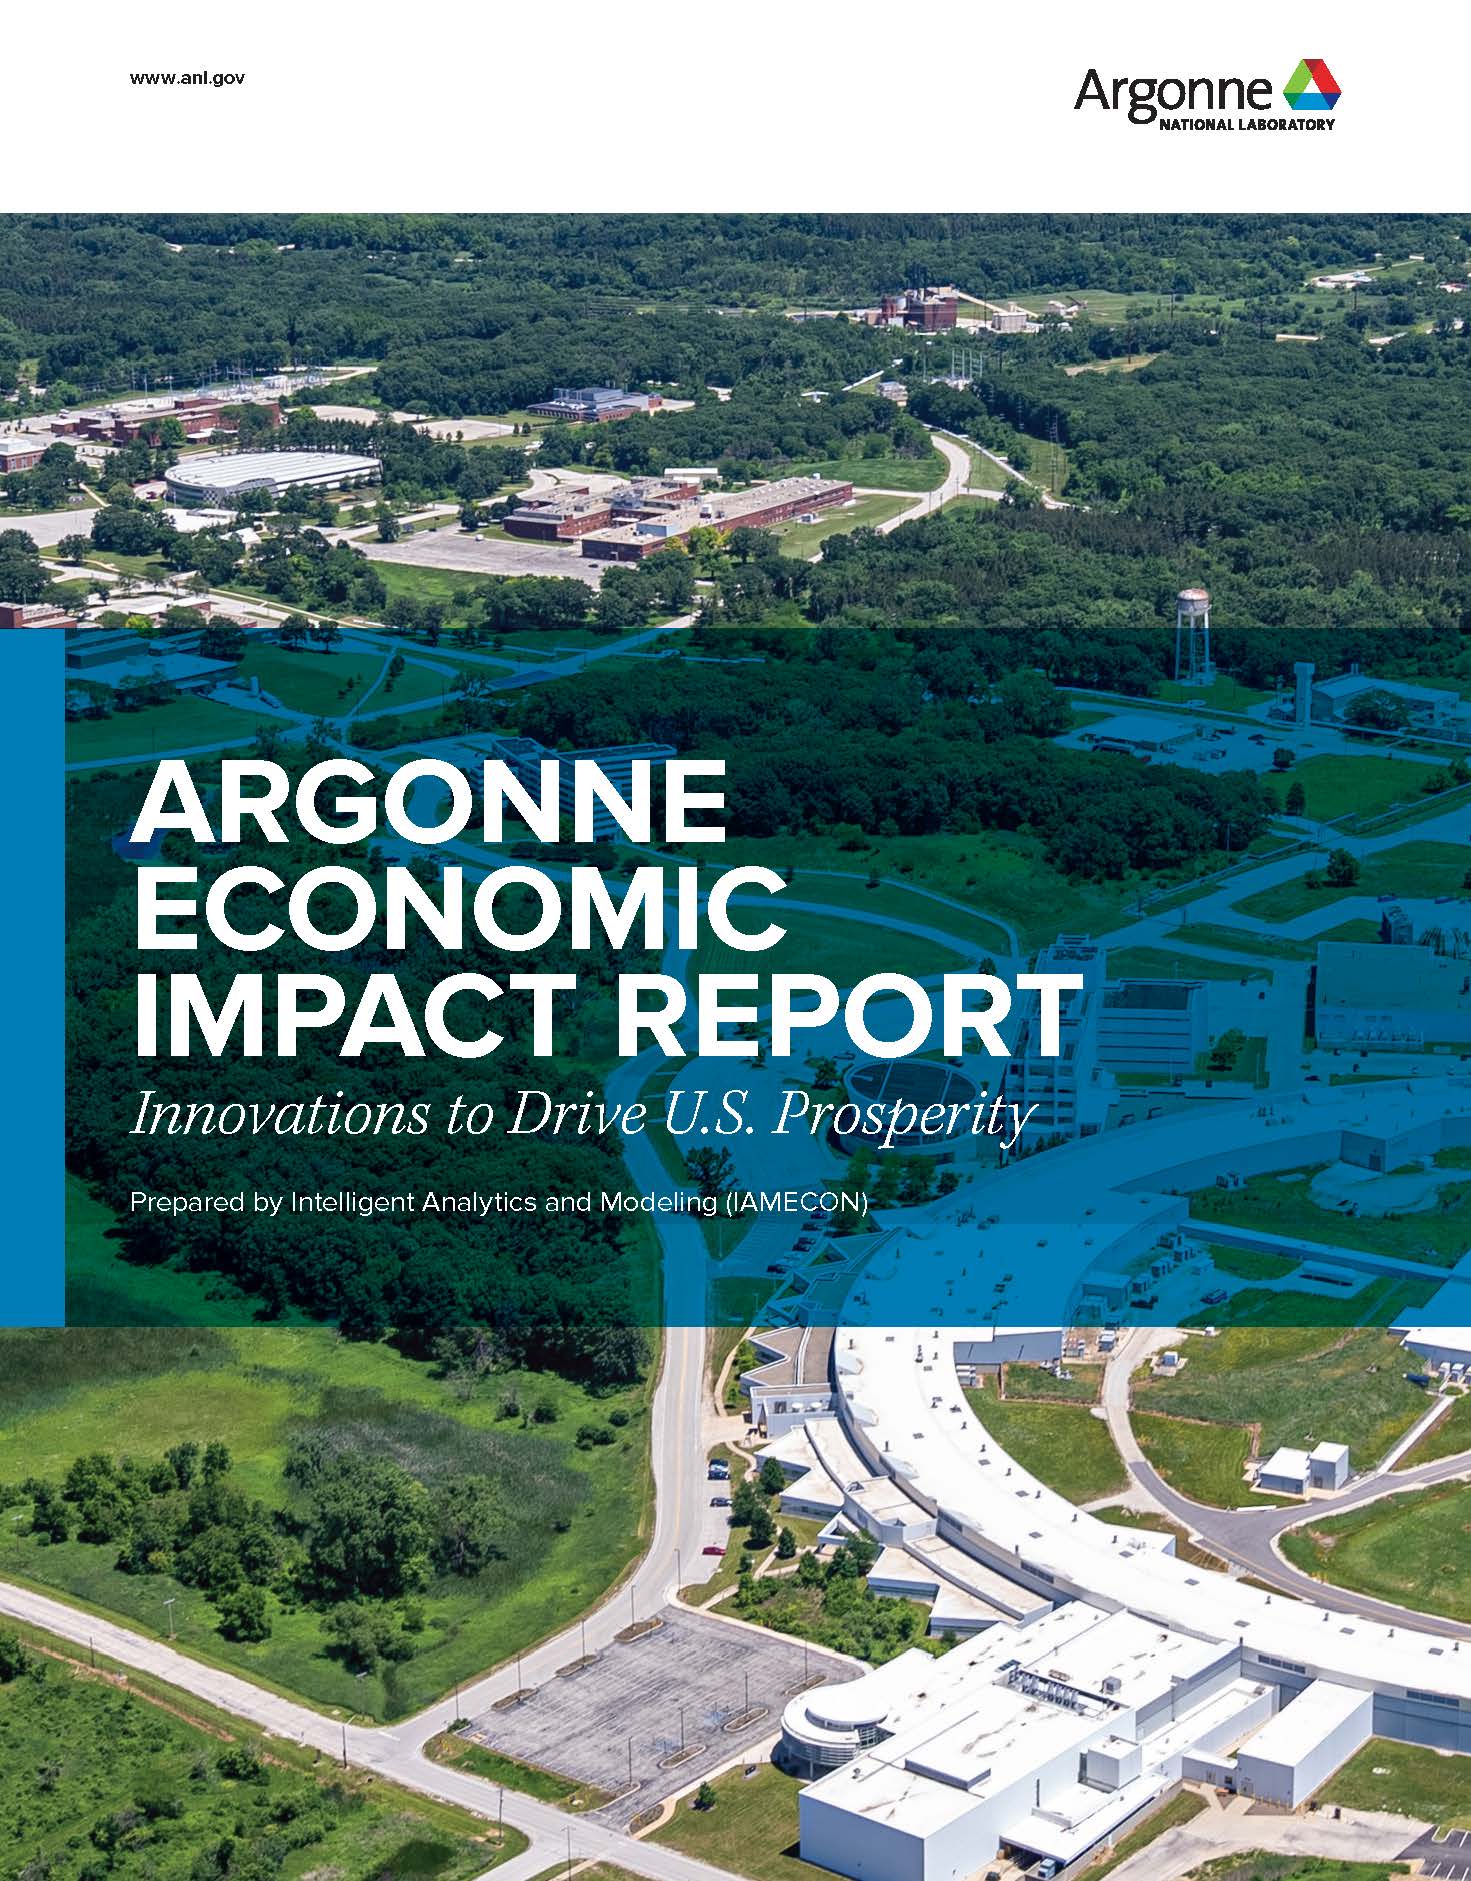 Aerial image of Argonne National Laboratory on the cover of the Argonne Economic Impact Report.